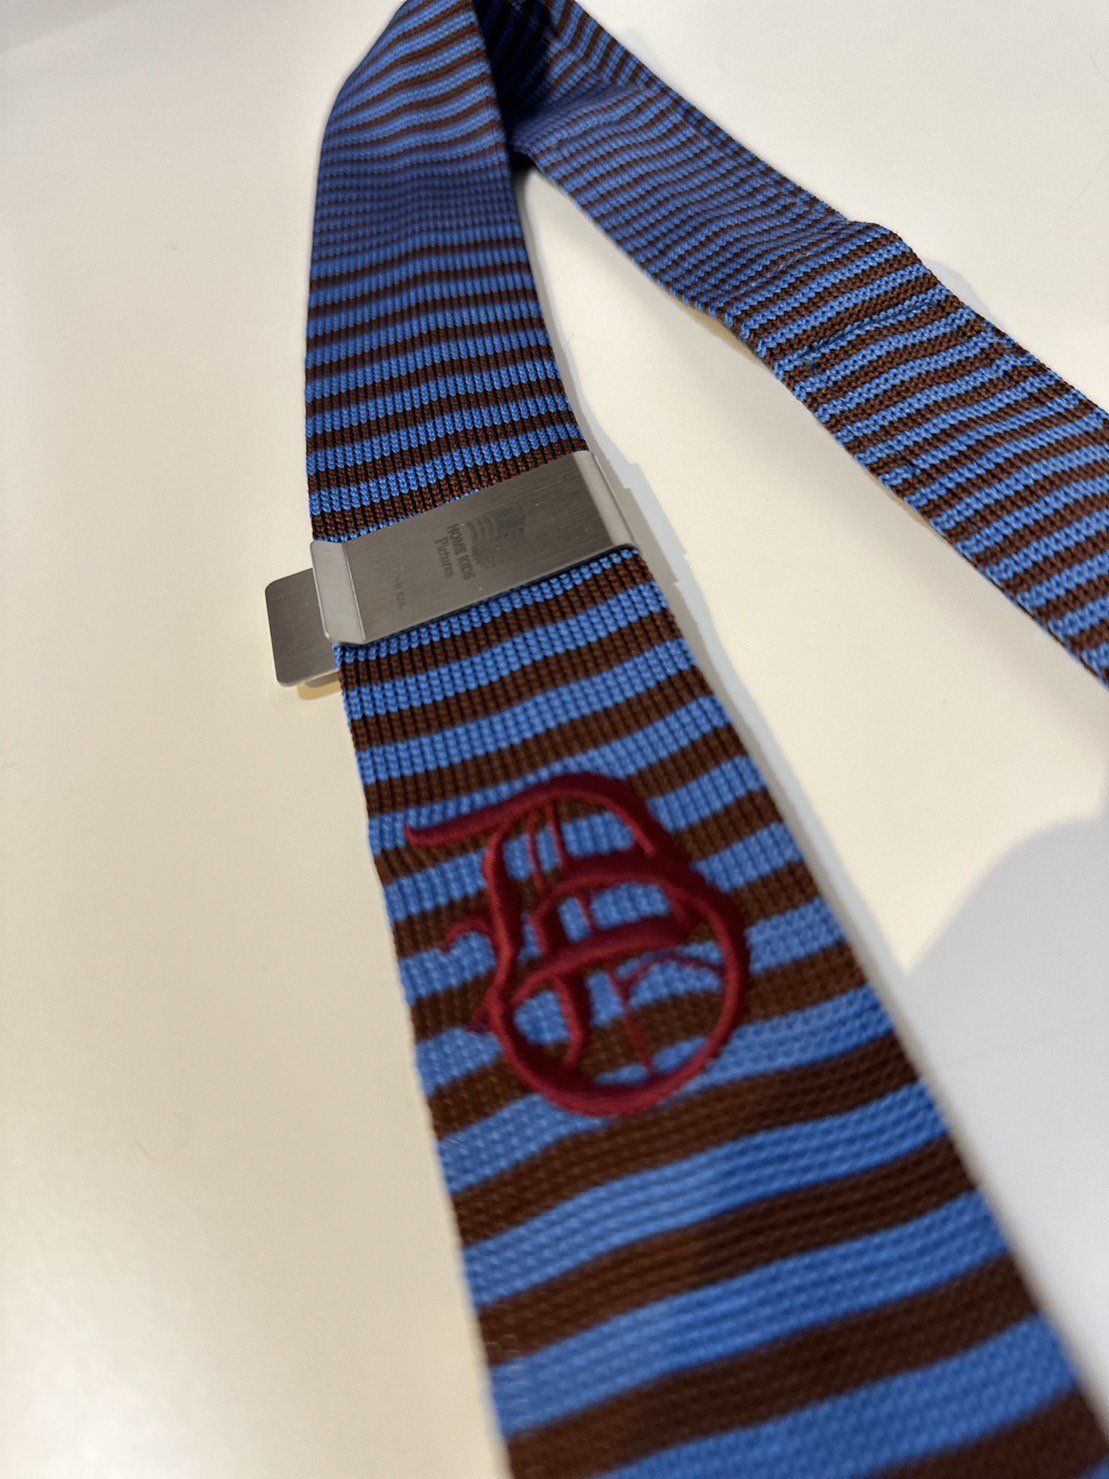 DAIRIKU<br />Knit Tie with Money Clip / Blue&Brown<img class='new_mark_img2' src='https://img.shop-pro.jp/img/new/icons14.gif' style='border:none;display:inline;margin:0px;padding:0px;width:auto;' />